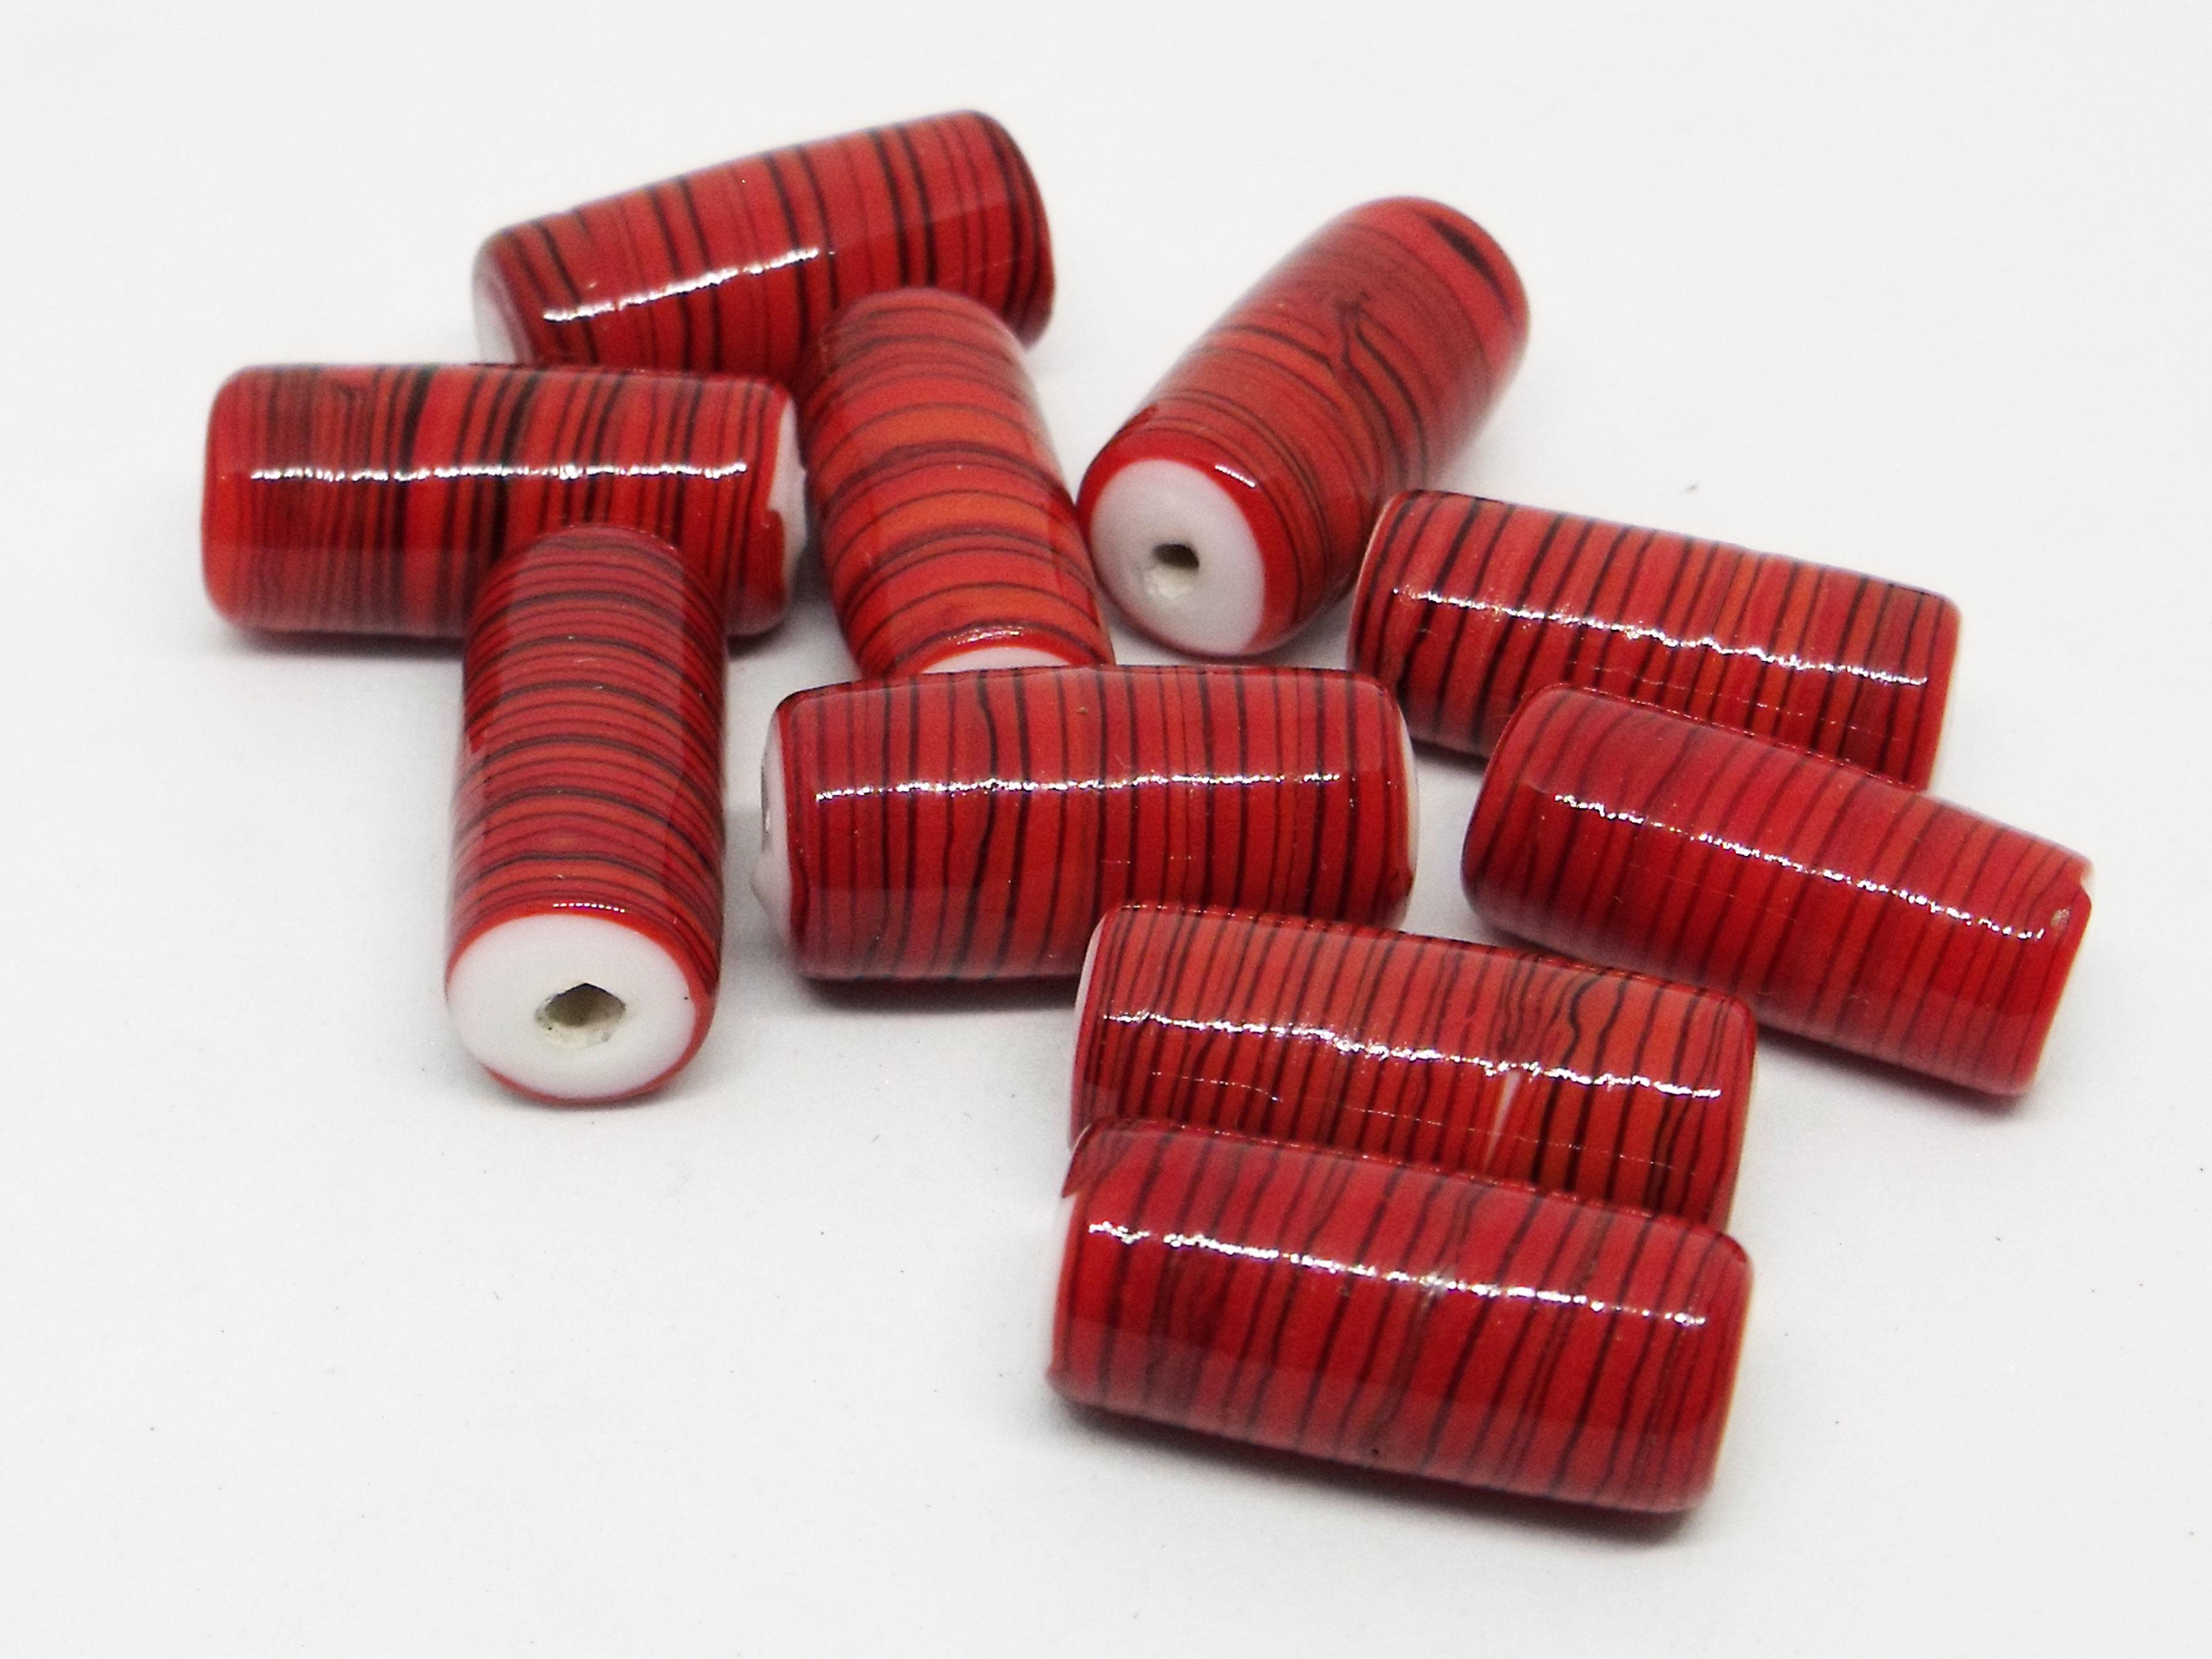 20x10mm Glass Tube Bead - White Base with Red and Black Stripes